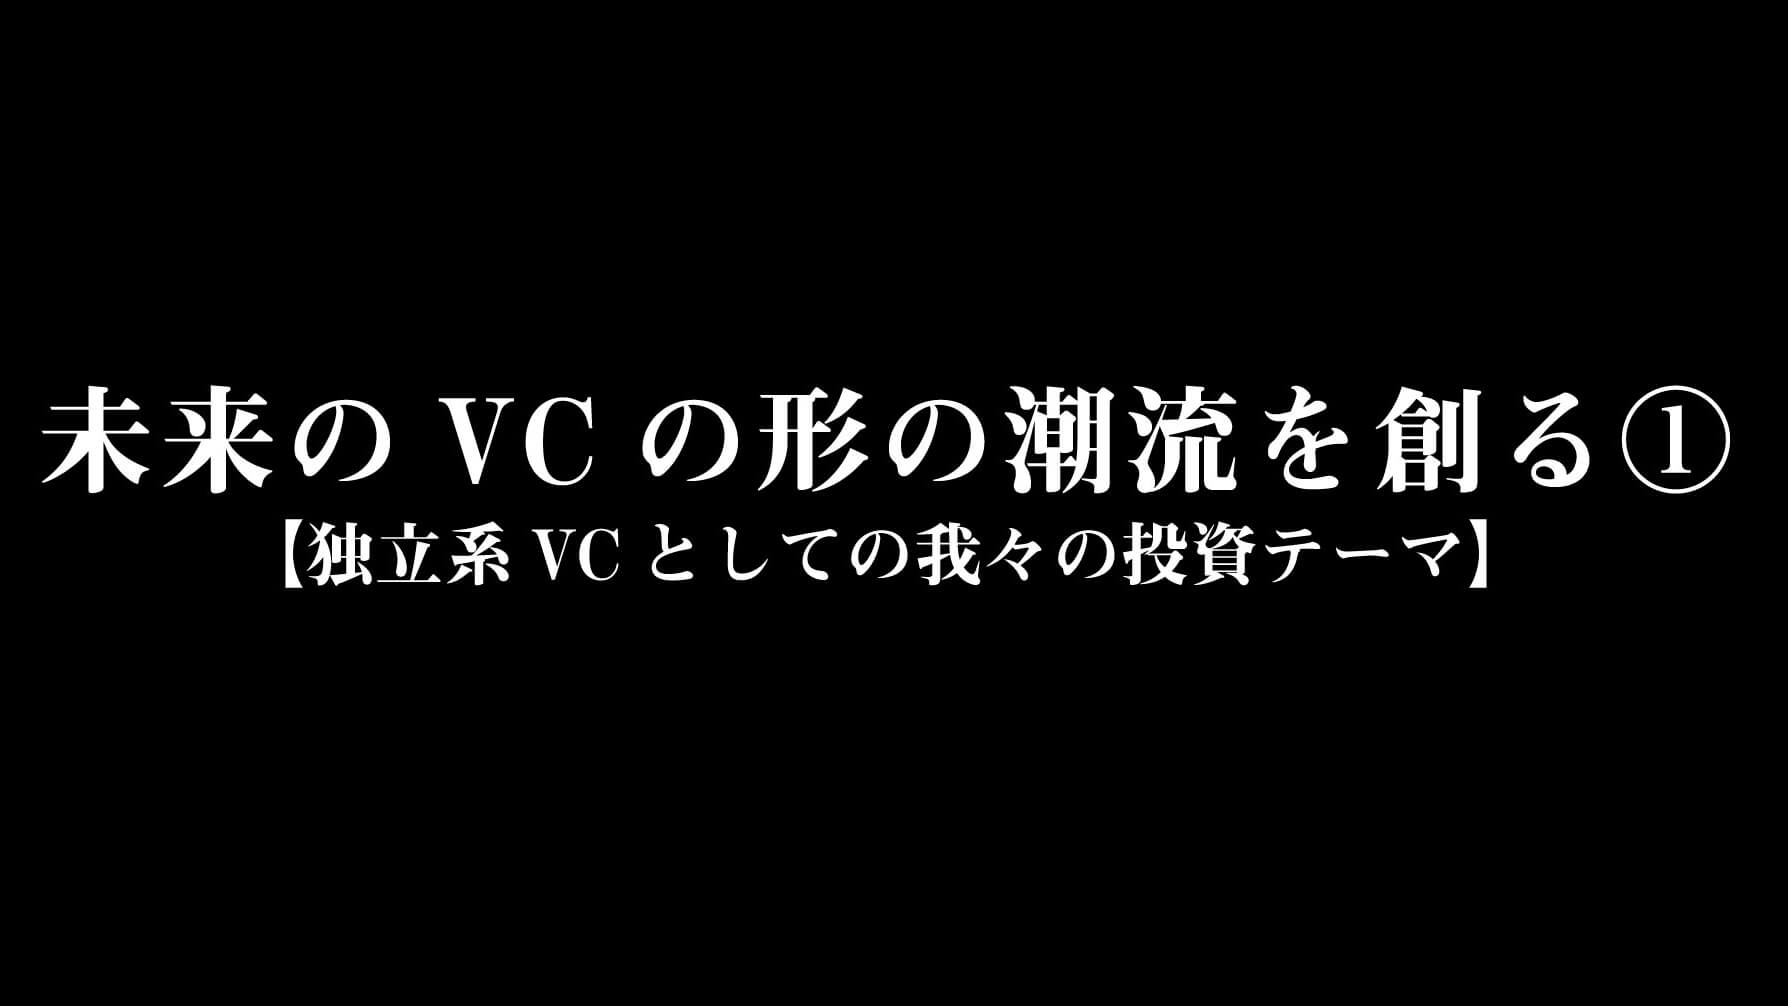 Read more about the article 未来のVCの形の潮流を創る①【独立系VCとしての我々の投資テーマ】